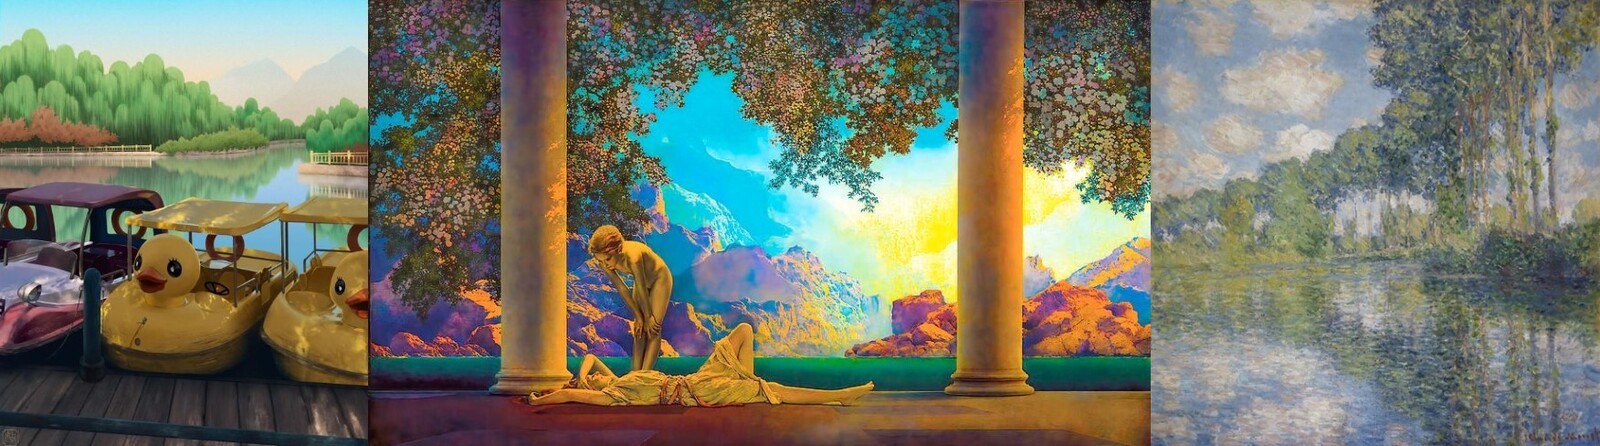  I referenced works by artists like Maxfield Parrish that stylized finer details, such as texture and lighting, but still maintained realism in the overall forms